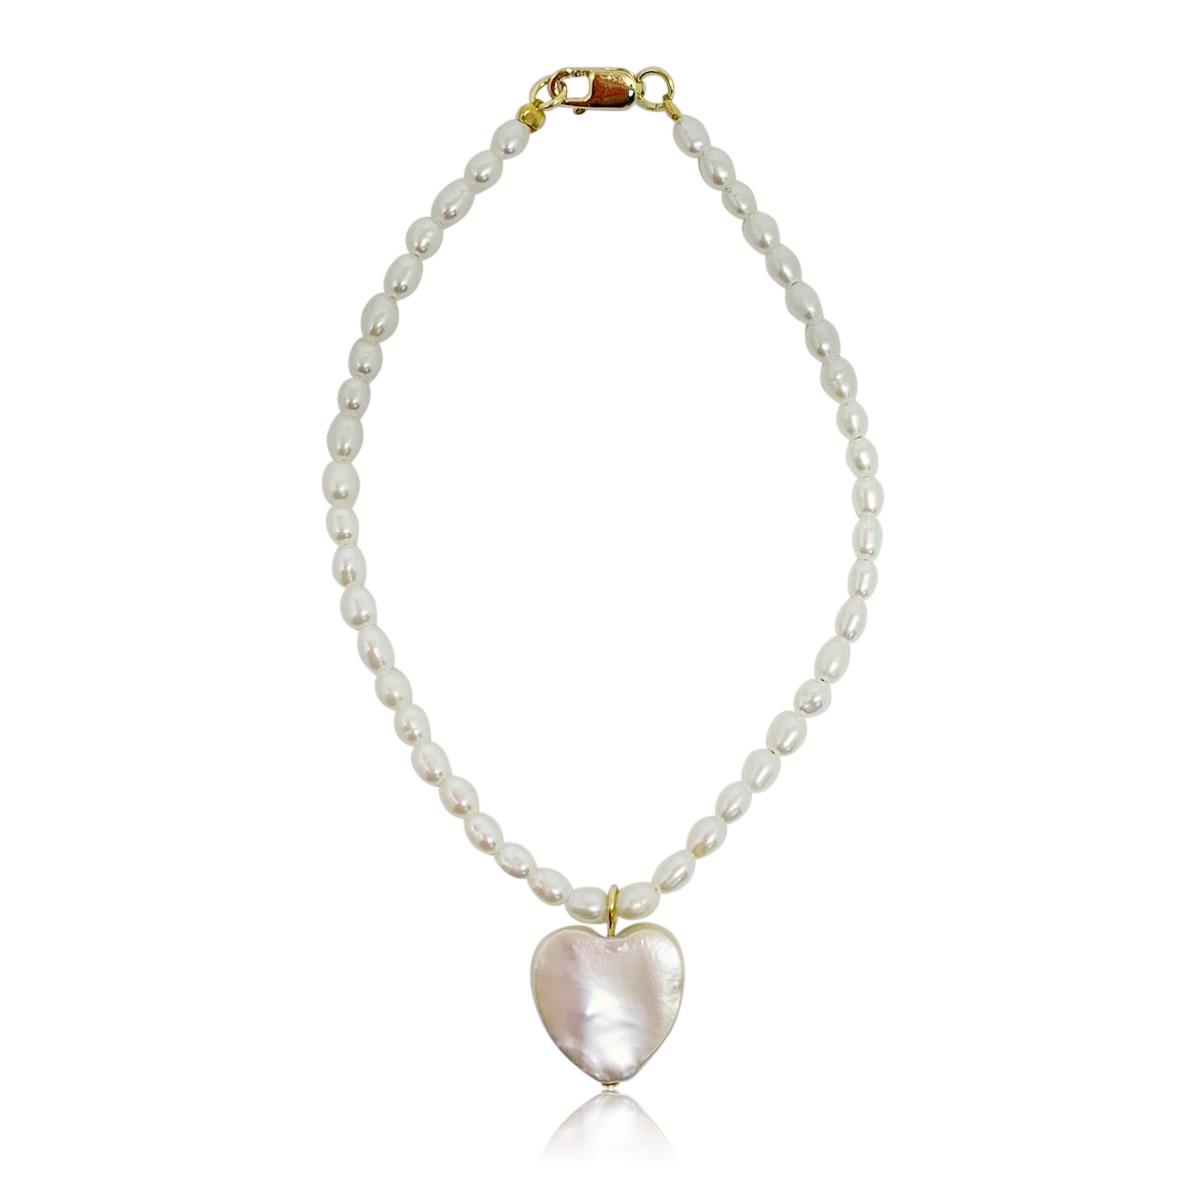 rice pearl bracelet with heart pearl charm